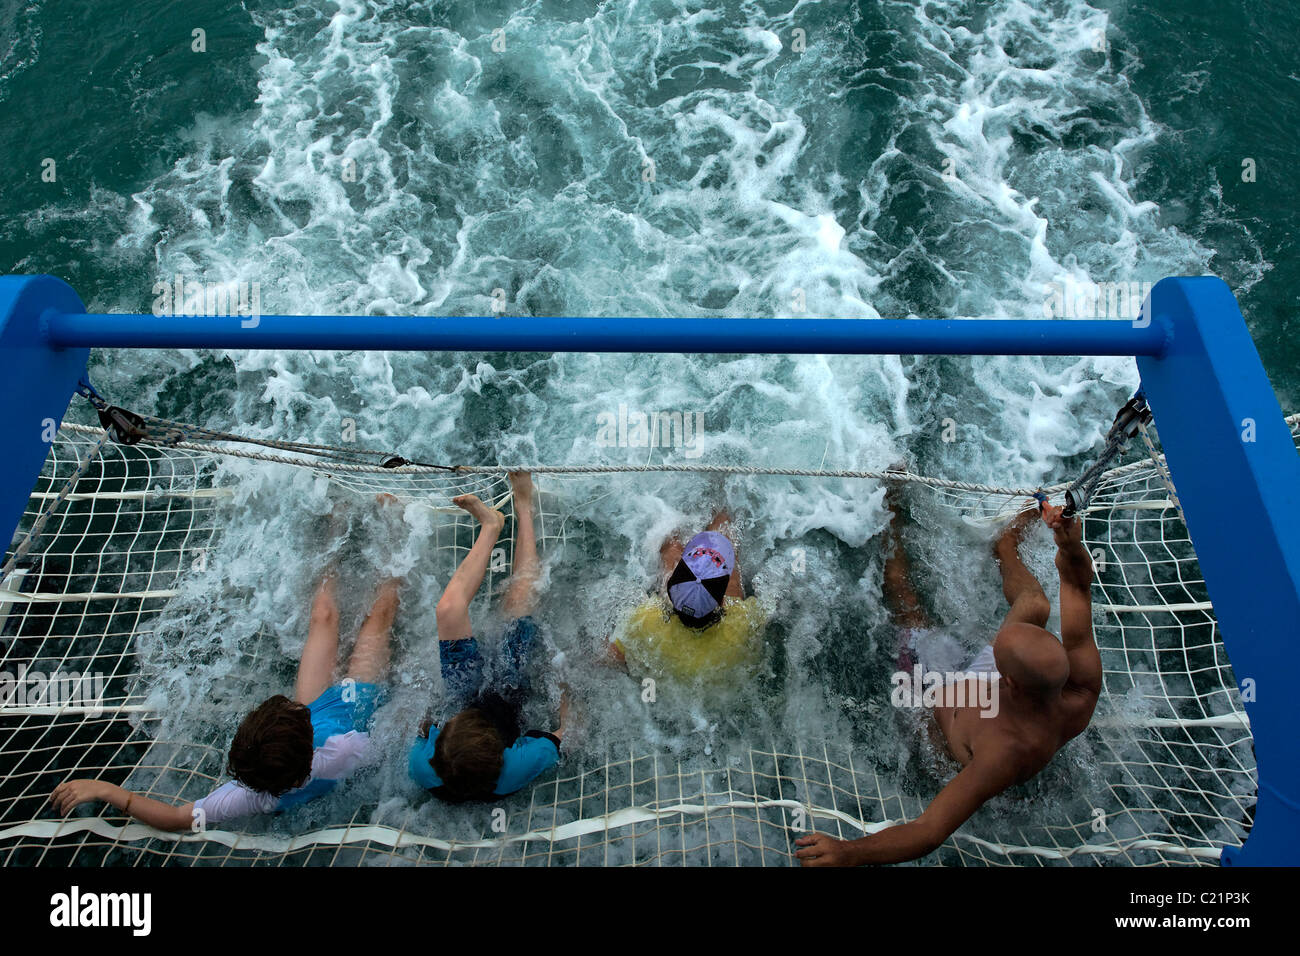 Tourists riding in a Boom Net at the stern of a Boat, Shark Bay Western Australia Stock Photo